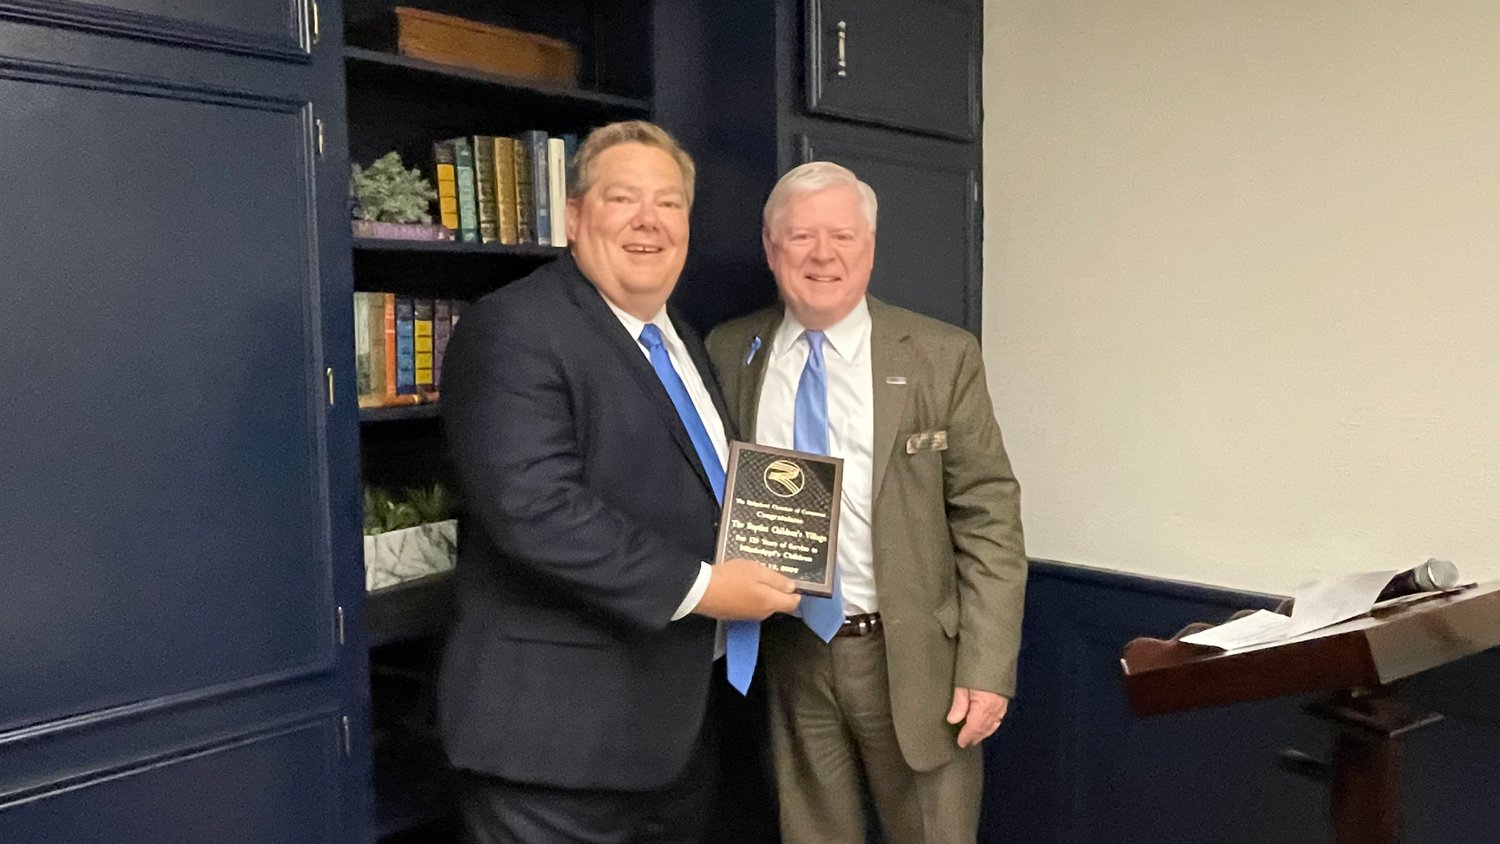 Baptist Children's Village Executive Director Sean Milner (left) stands with 
Ridgeland Chamber of Commerce Rep. Ray Balentine (right) after receiving a plaque honoring the 125th anniversary of the Baptist Children's Village. 